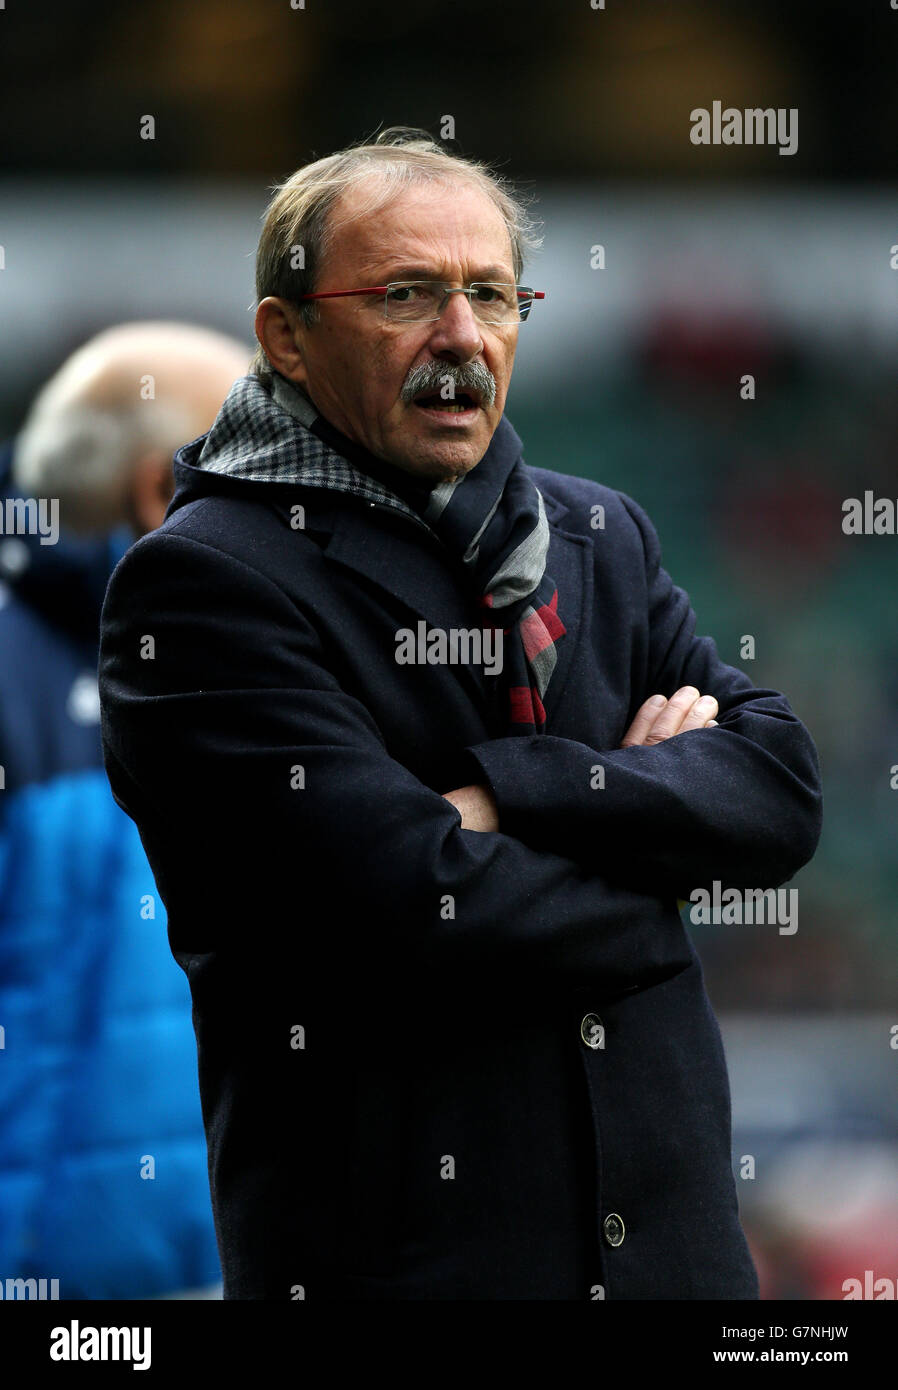 Rugby Union - 2015 RBS Six Nations - England v Italy - Twickenham. Italy coach Jacques Brunel during the 6 Nations match at Twickenham, London. Stock Photo